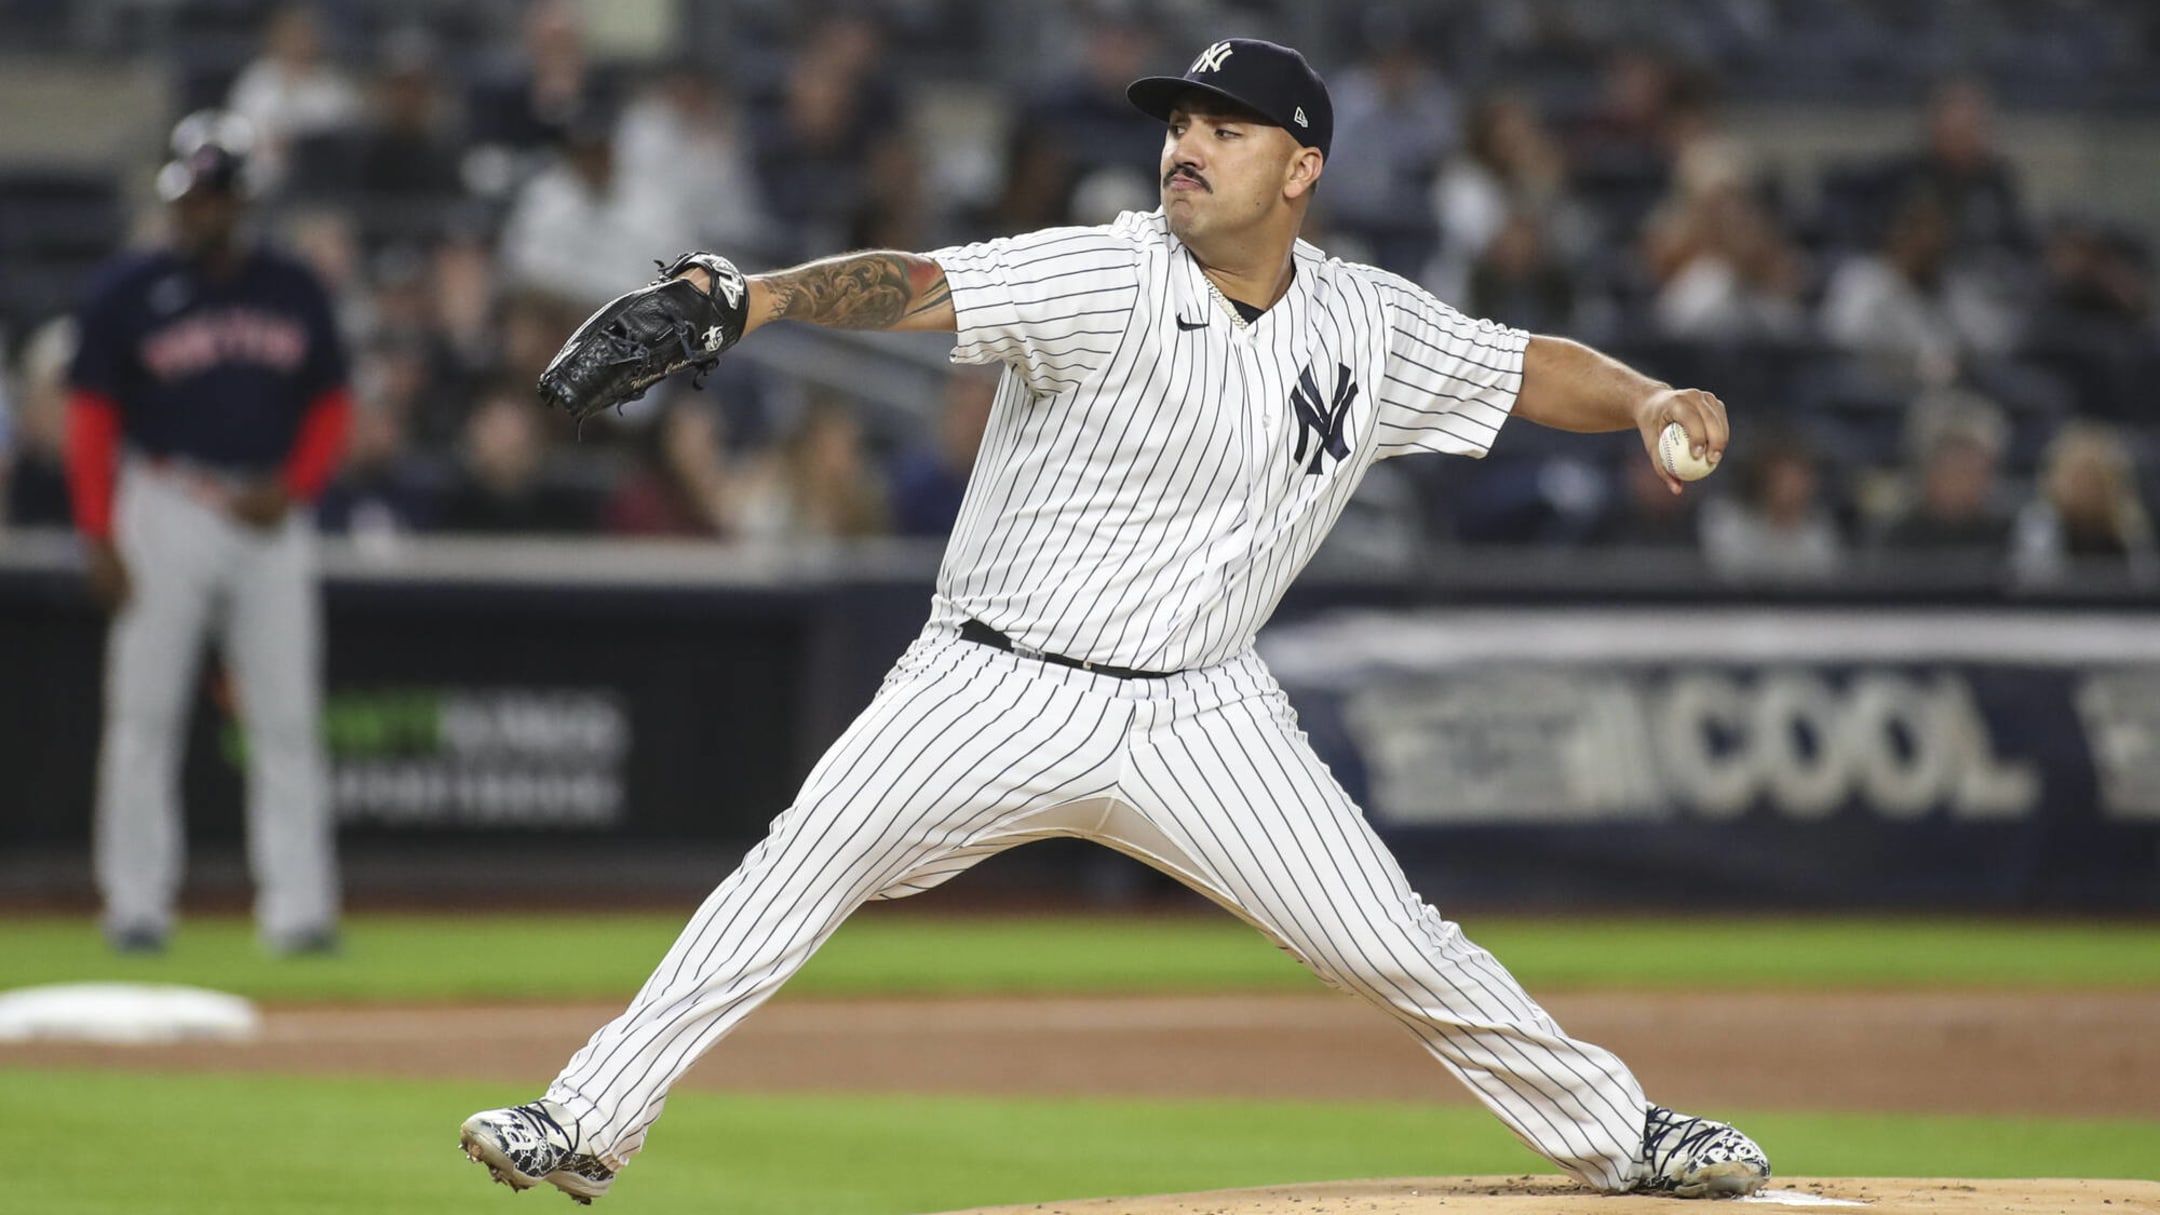 NY Yankees host ALDS Game 5 against Cleveland Guardians Tuesday afternoon